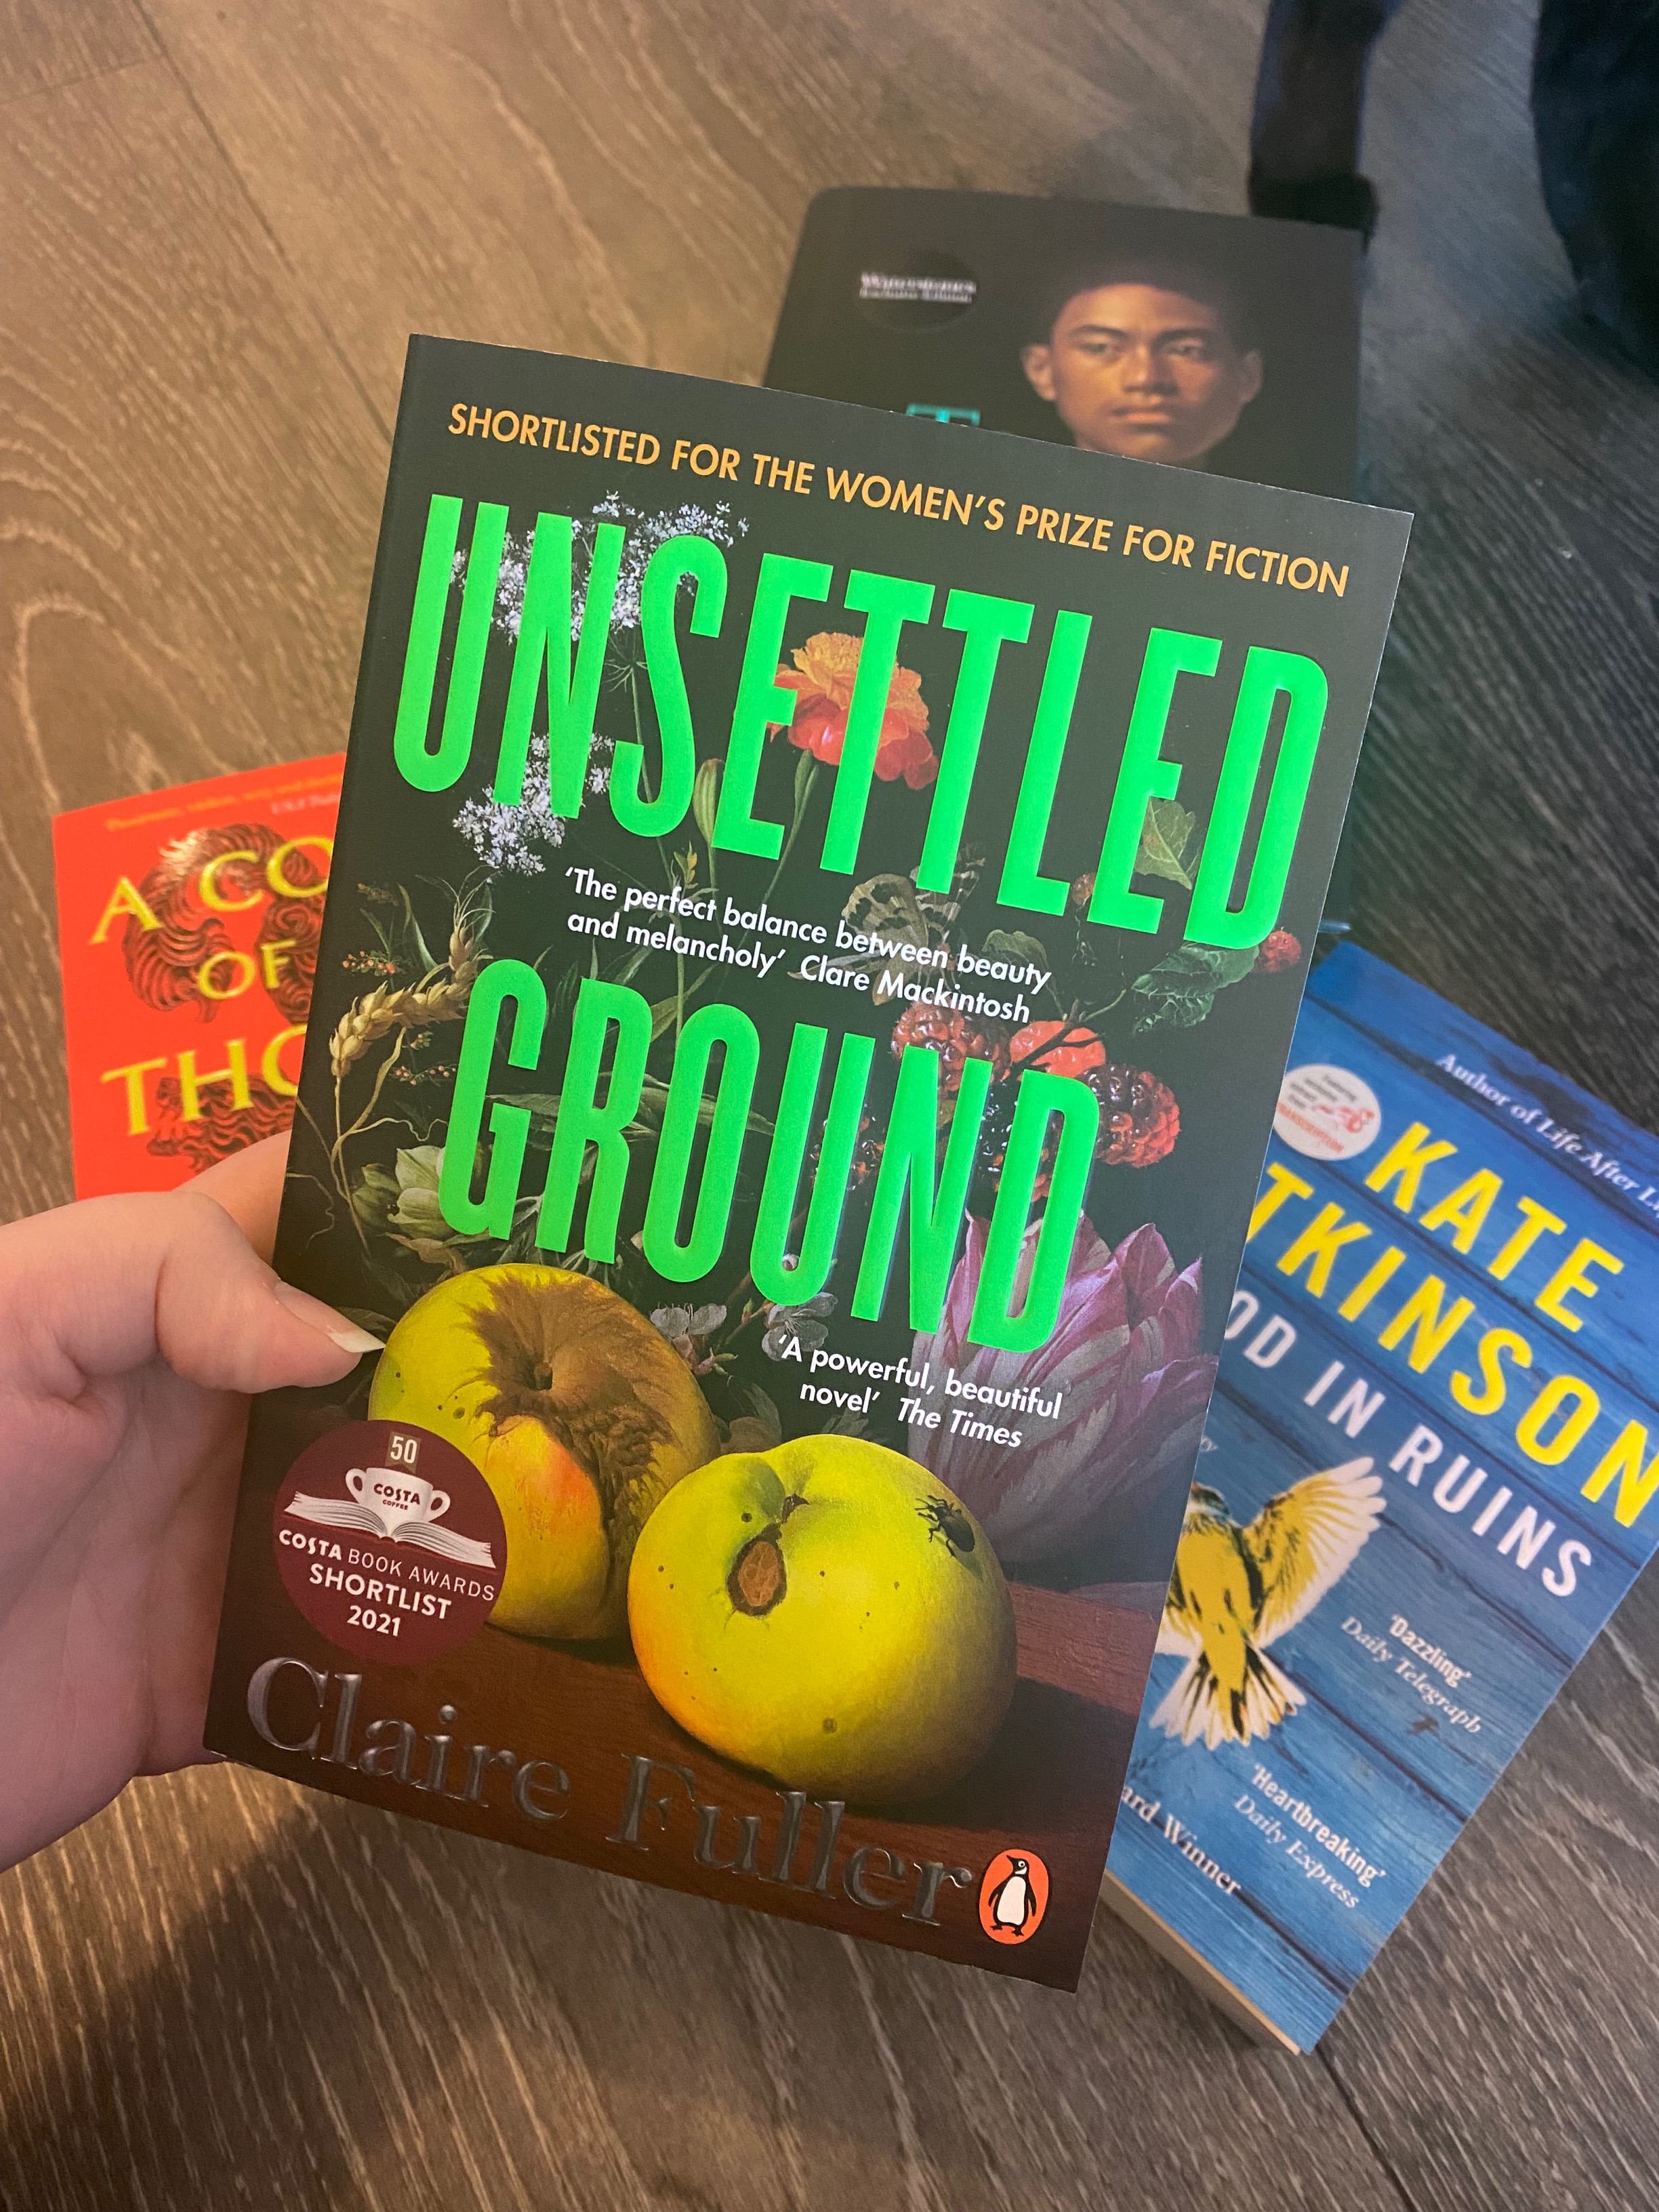 book review unsettled ground